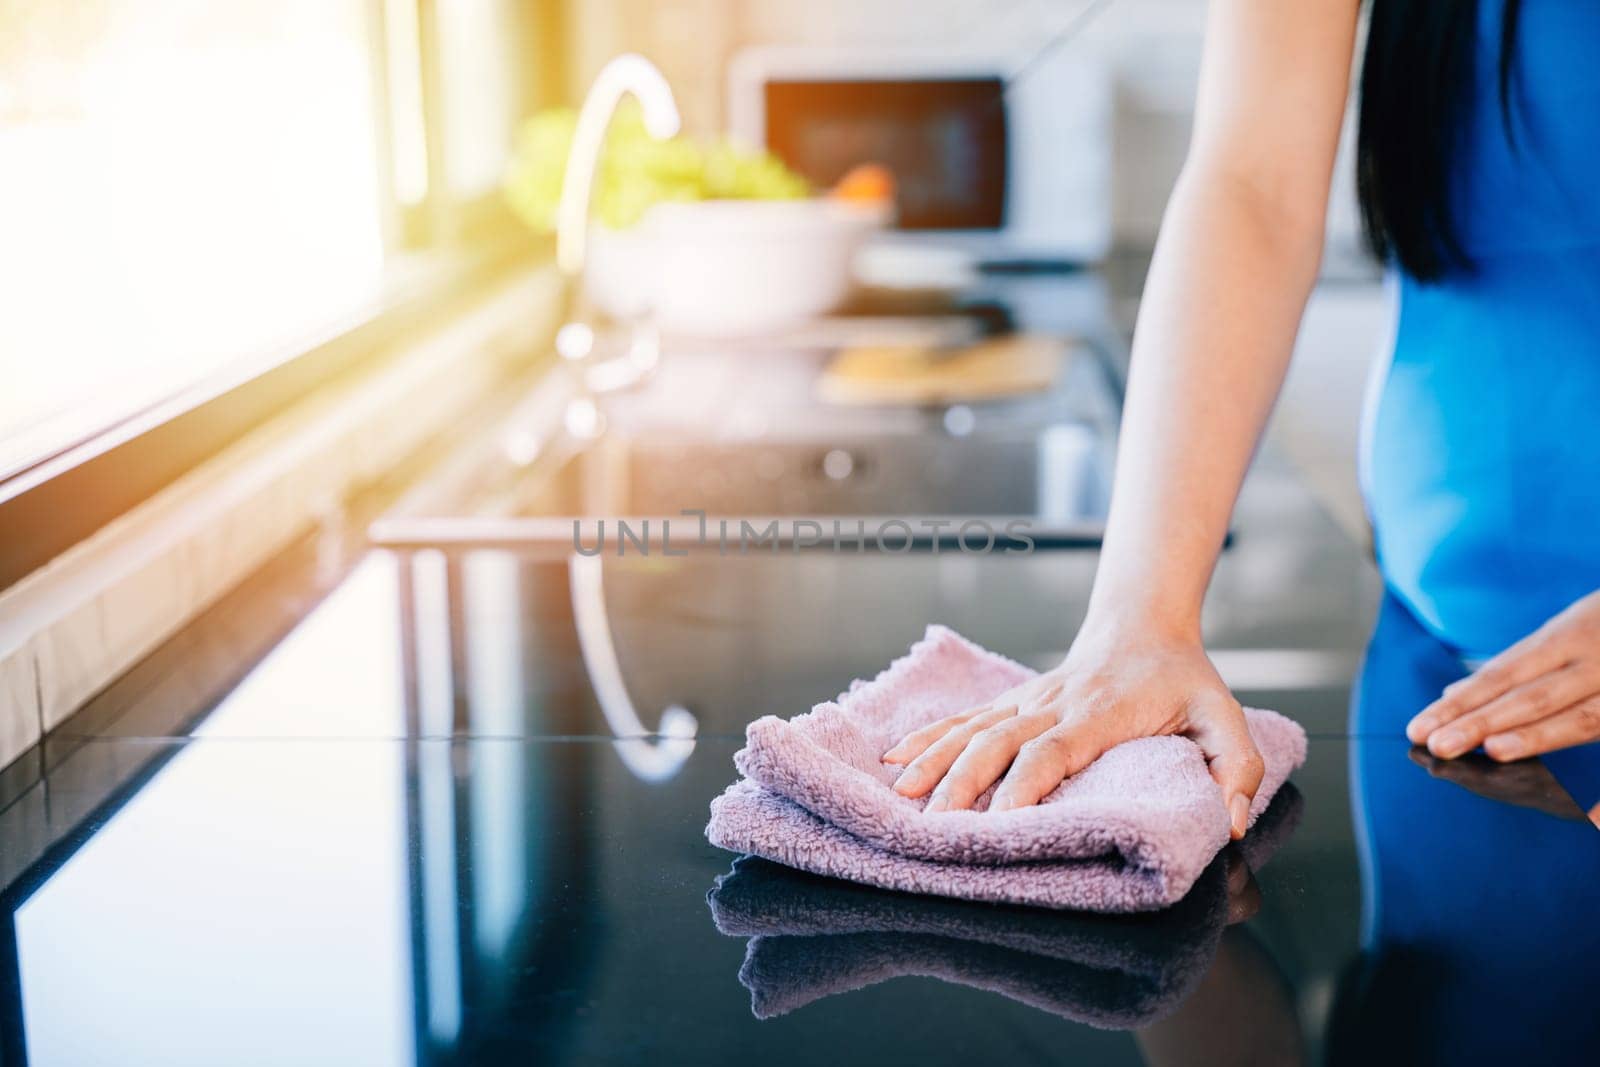 Young housewife smiles while disinfecting her kitchen table with a rag and detergent. Emphasizing routine cleaning and care for a sanitized living space. Wiping cloth kitchen